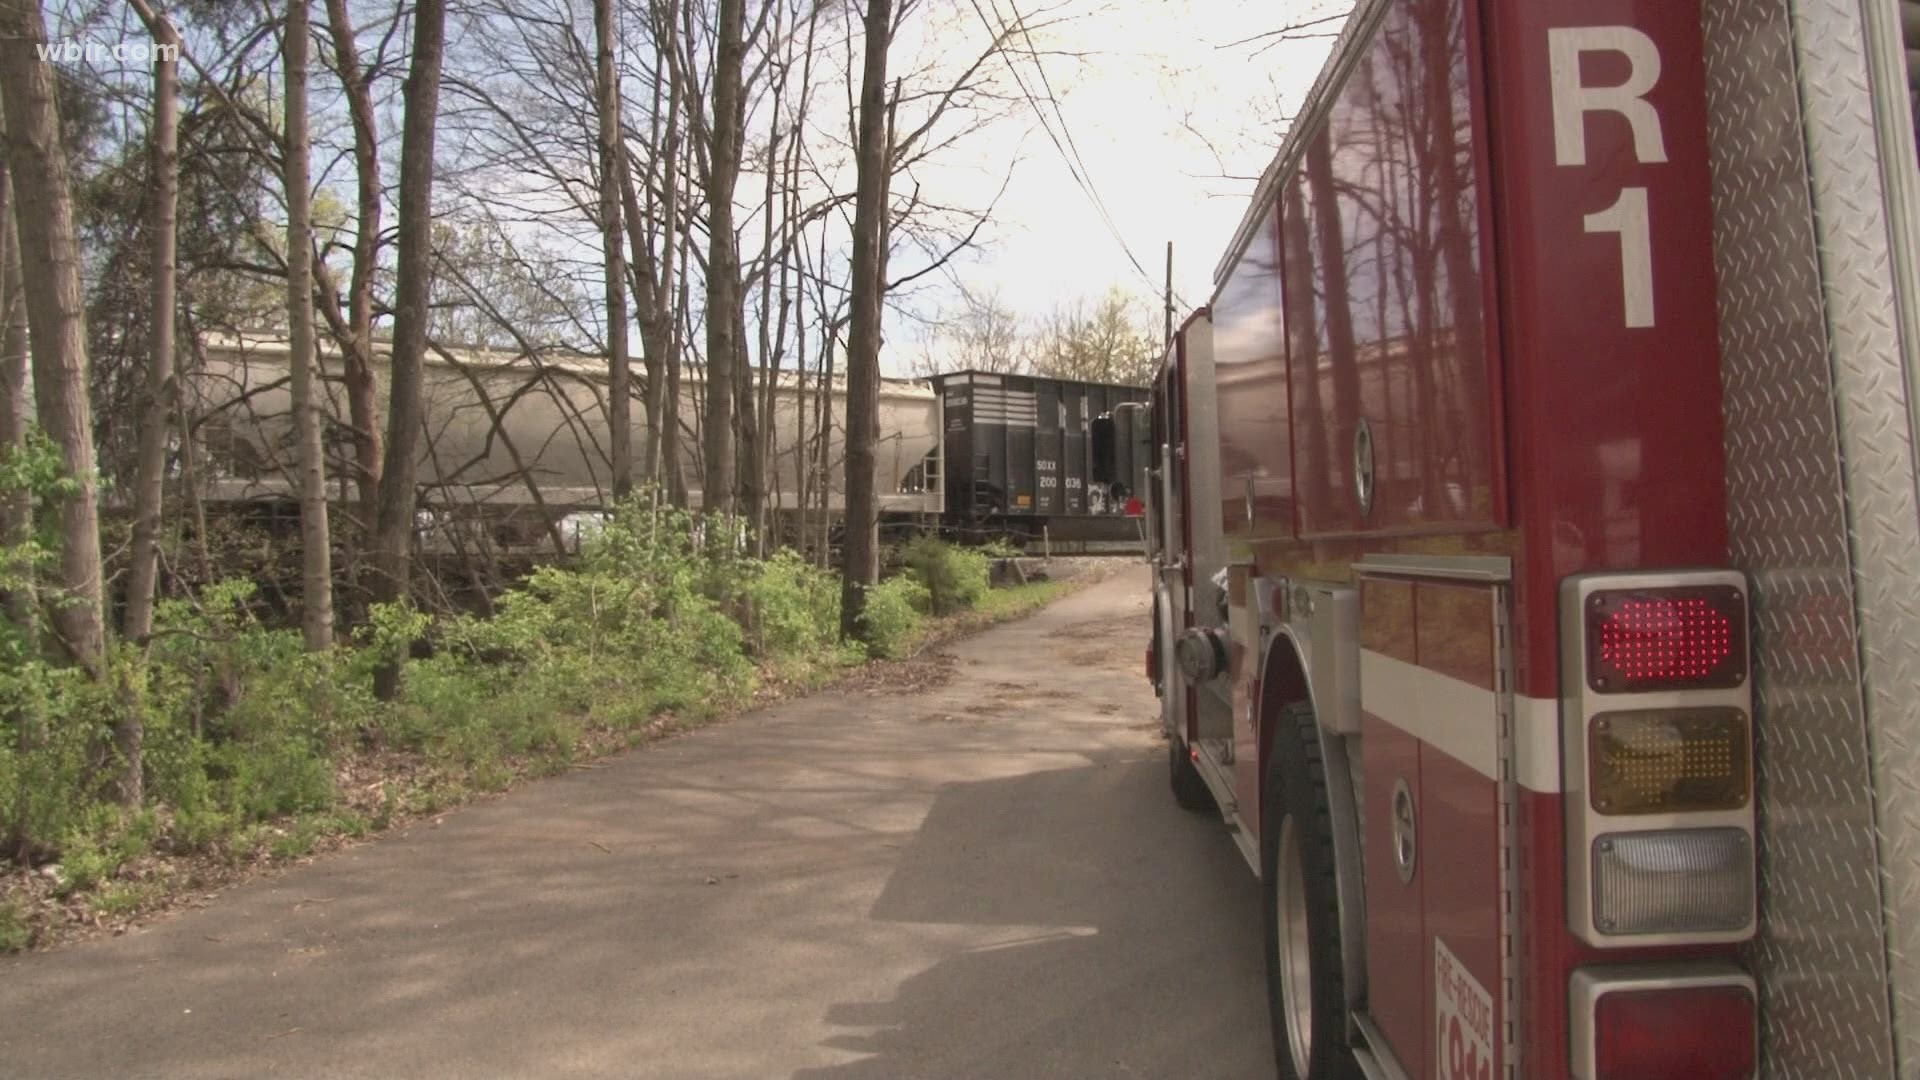 An unnamed woman was struck and killed by a train Friday in North Knoxville.